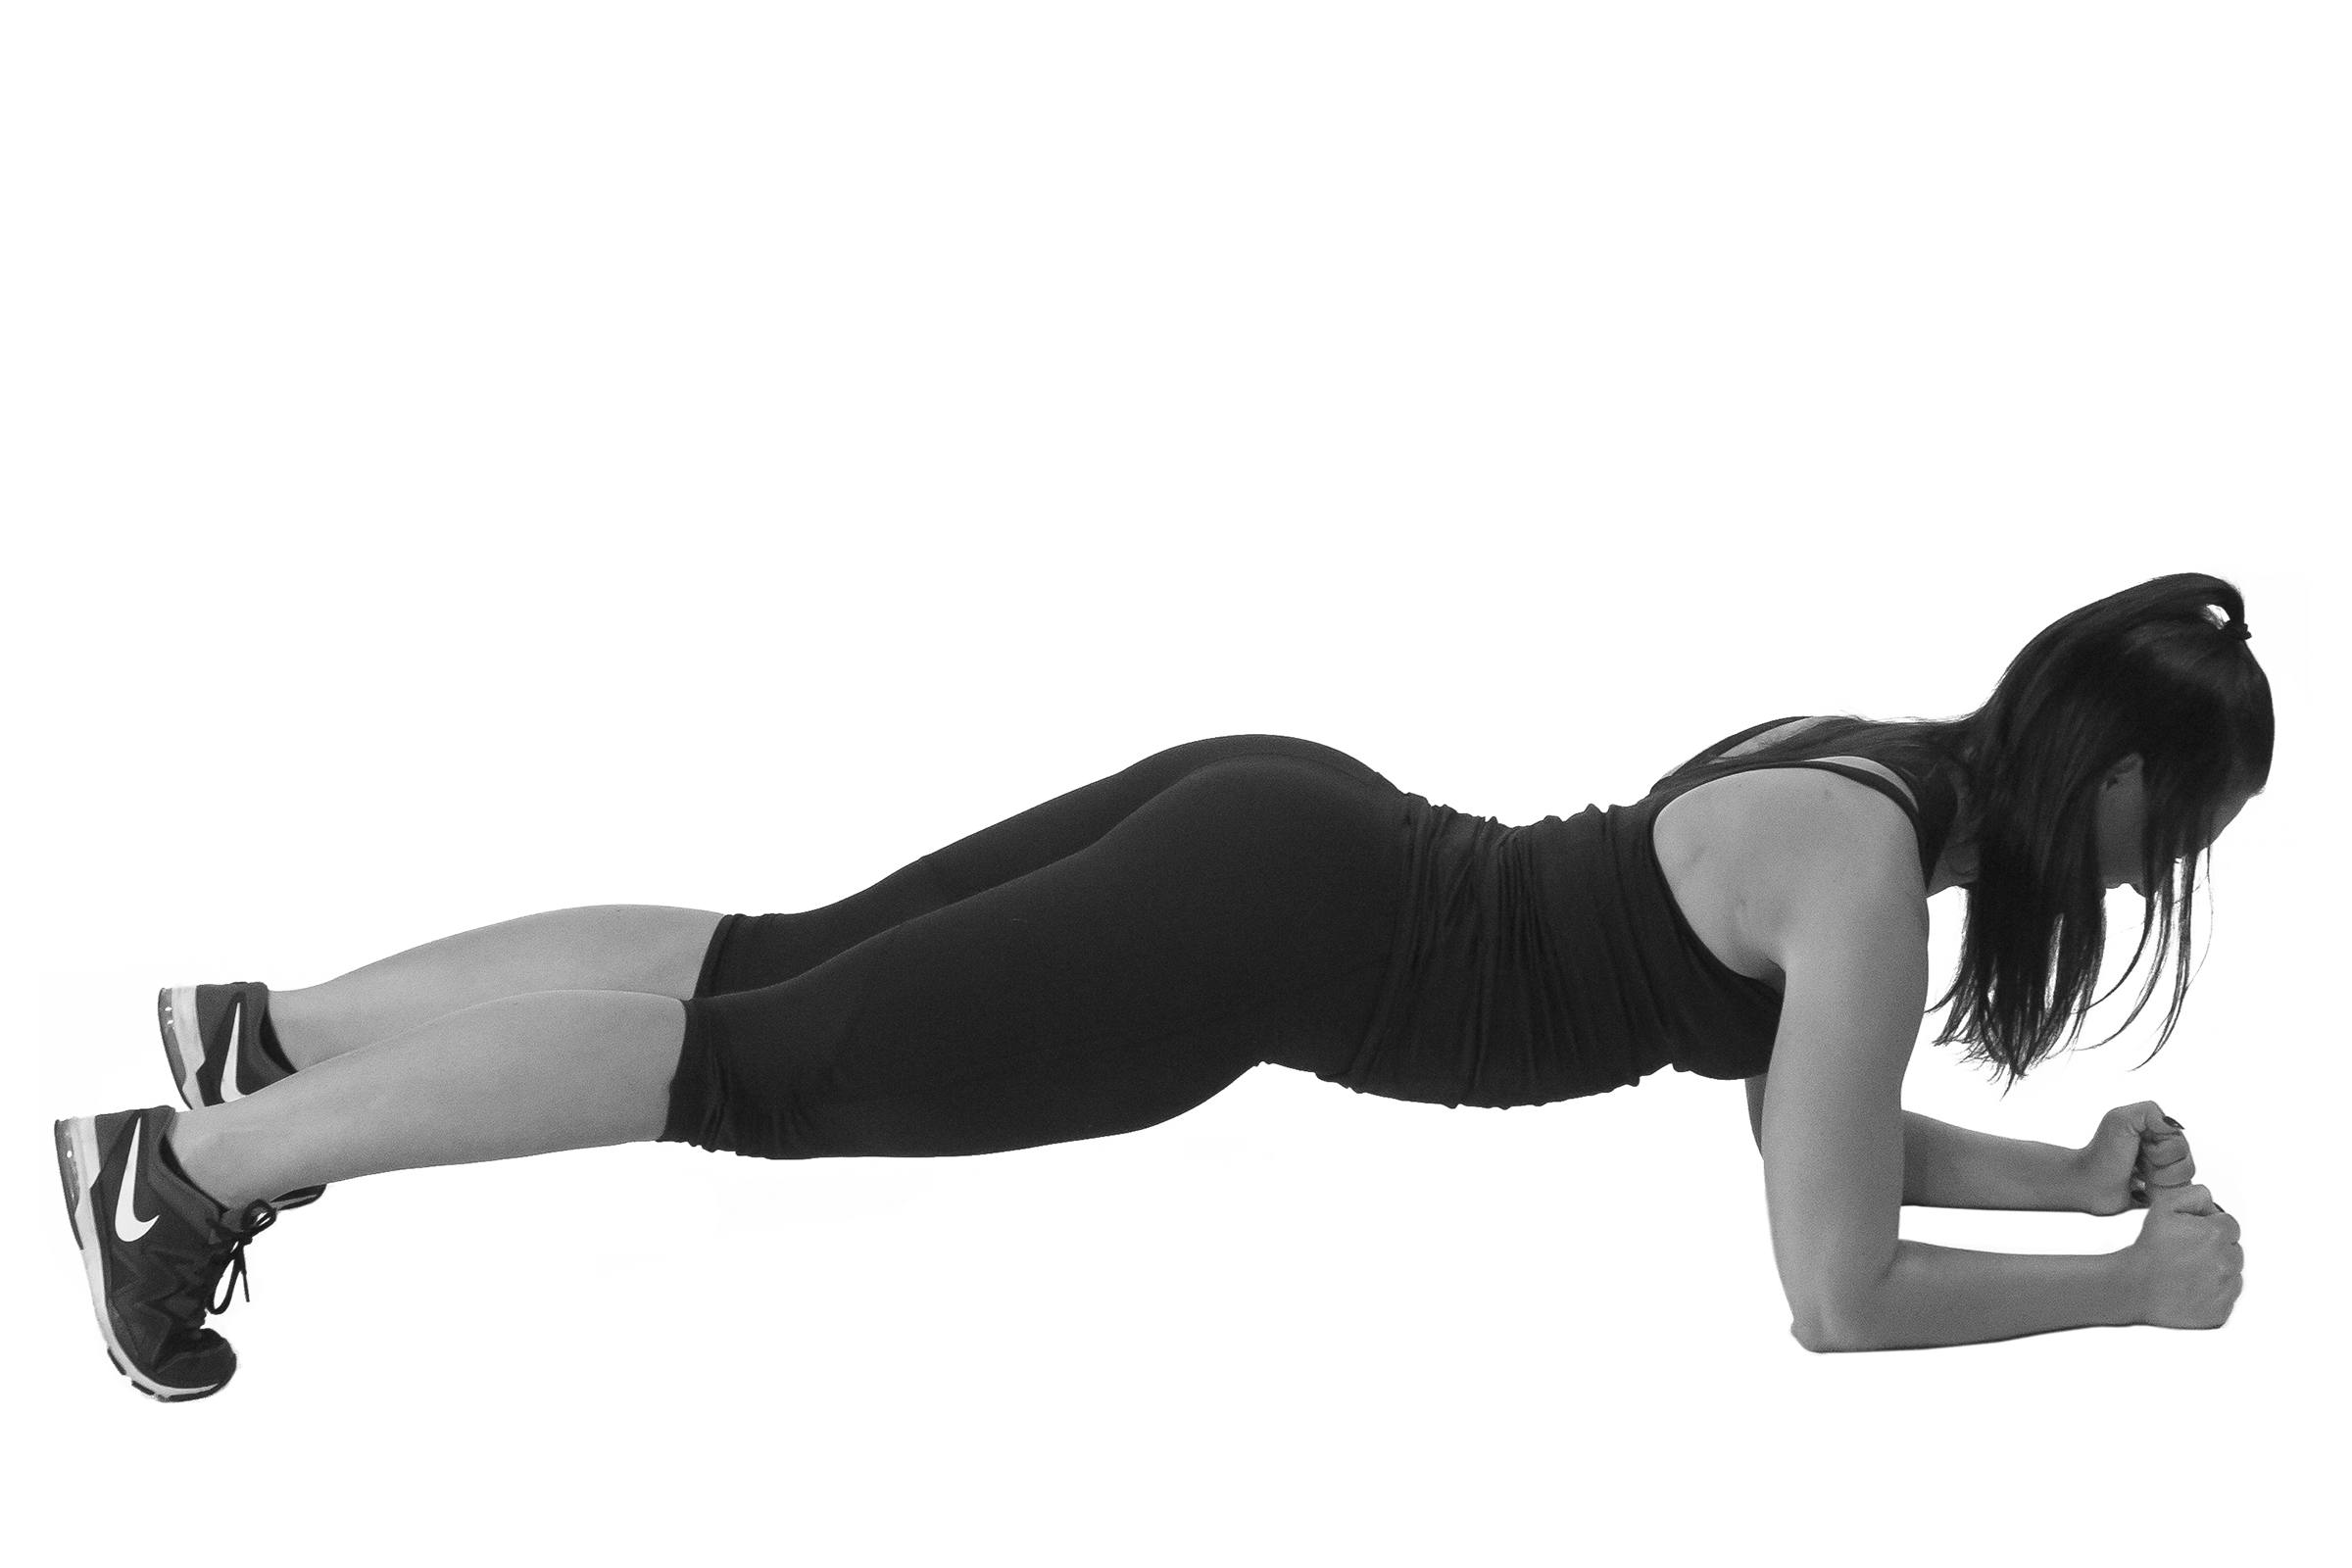 01-plank-plank-exercises-subtly-transform-abs